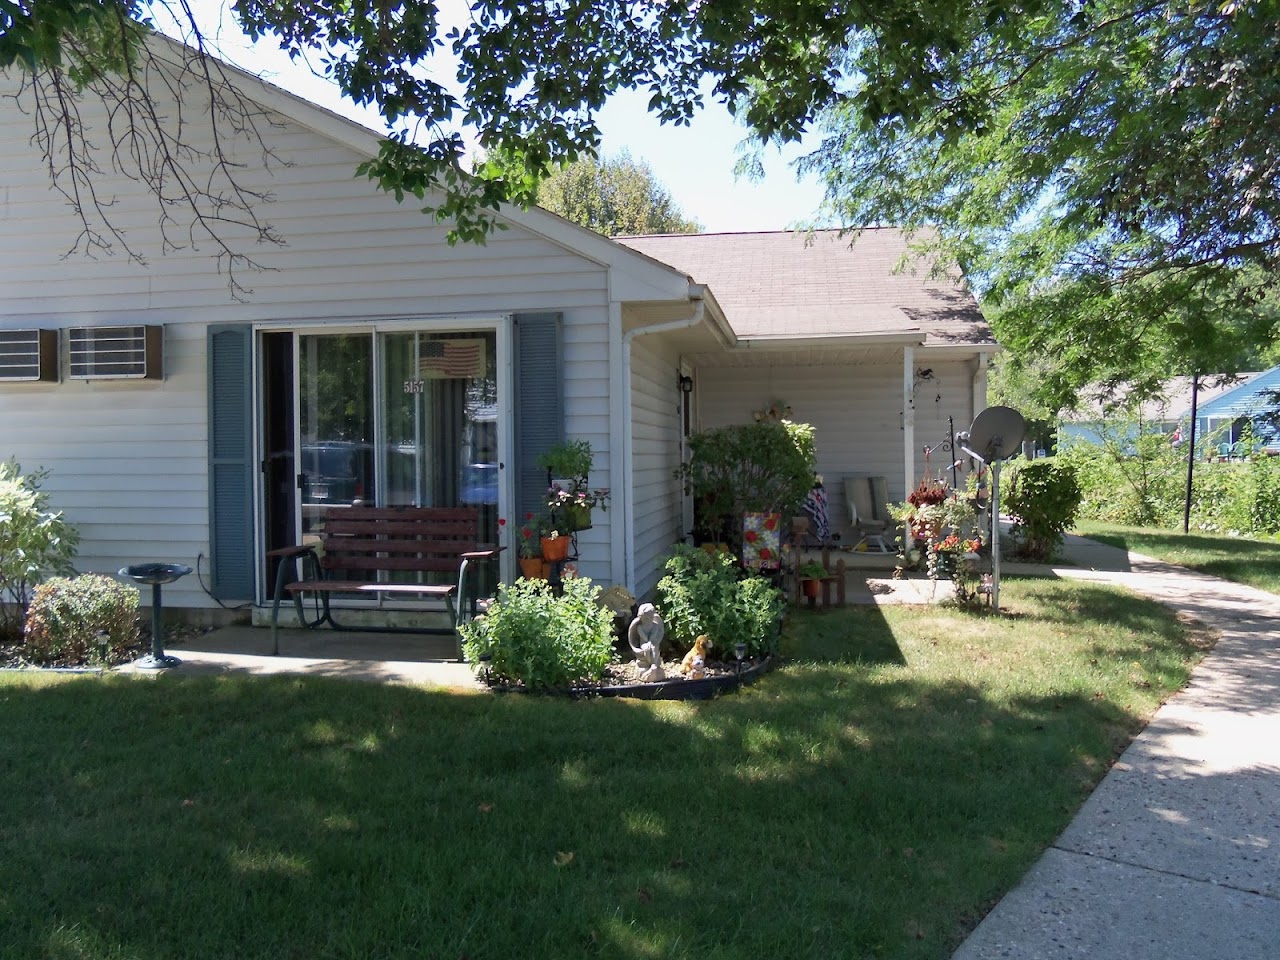 Photo of COTTAGES. Affordable housing located at 5165 TAYLOR RD MC FARLAND, WI 53558